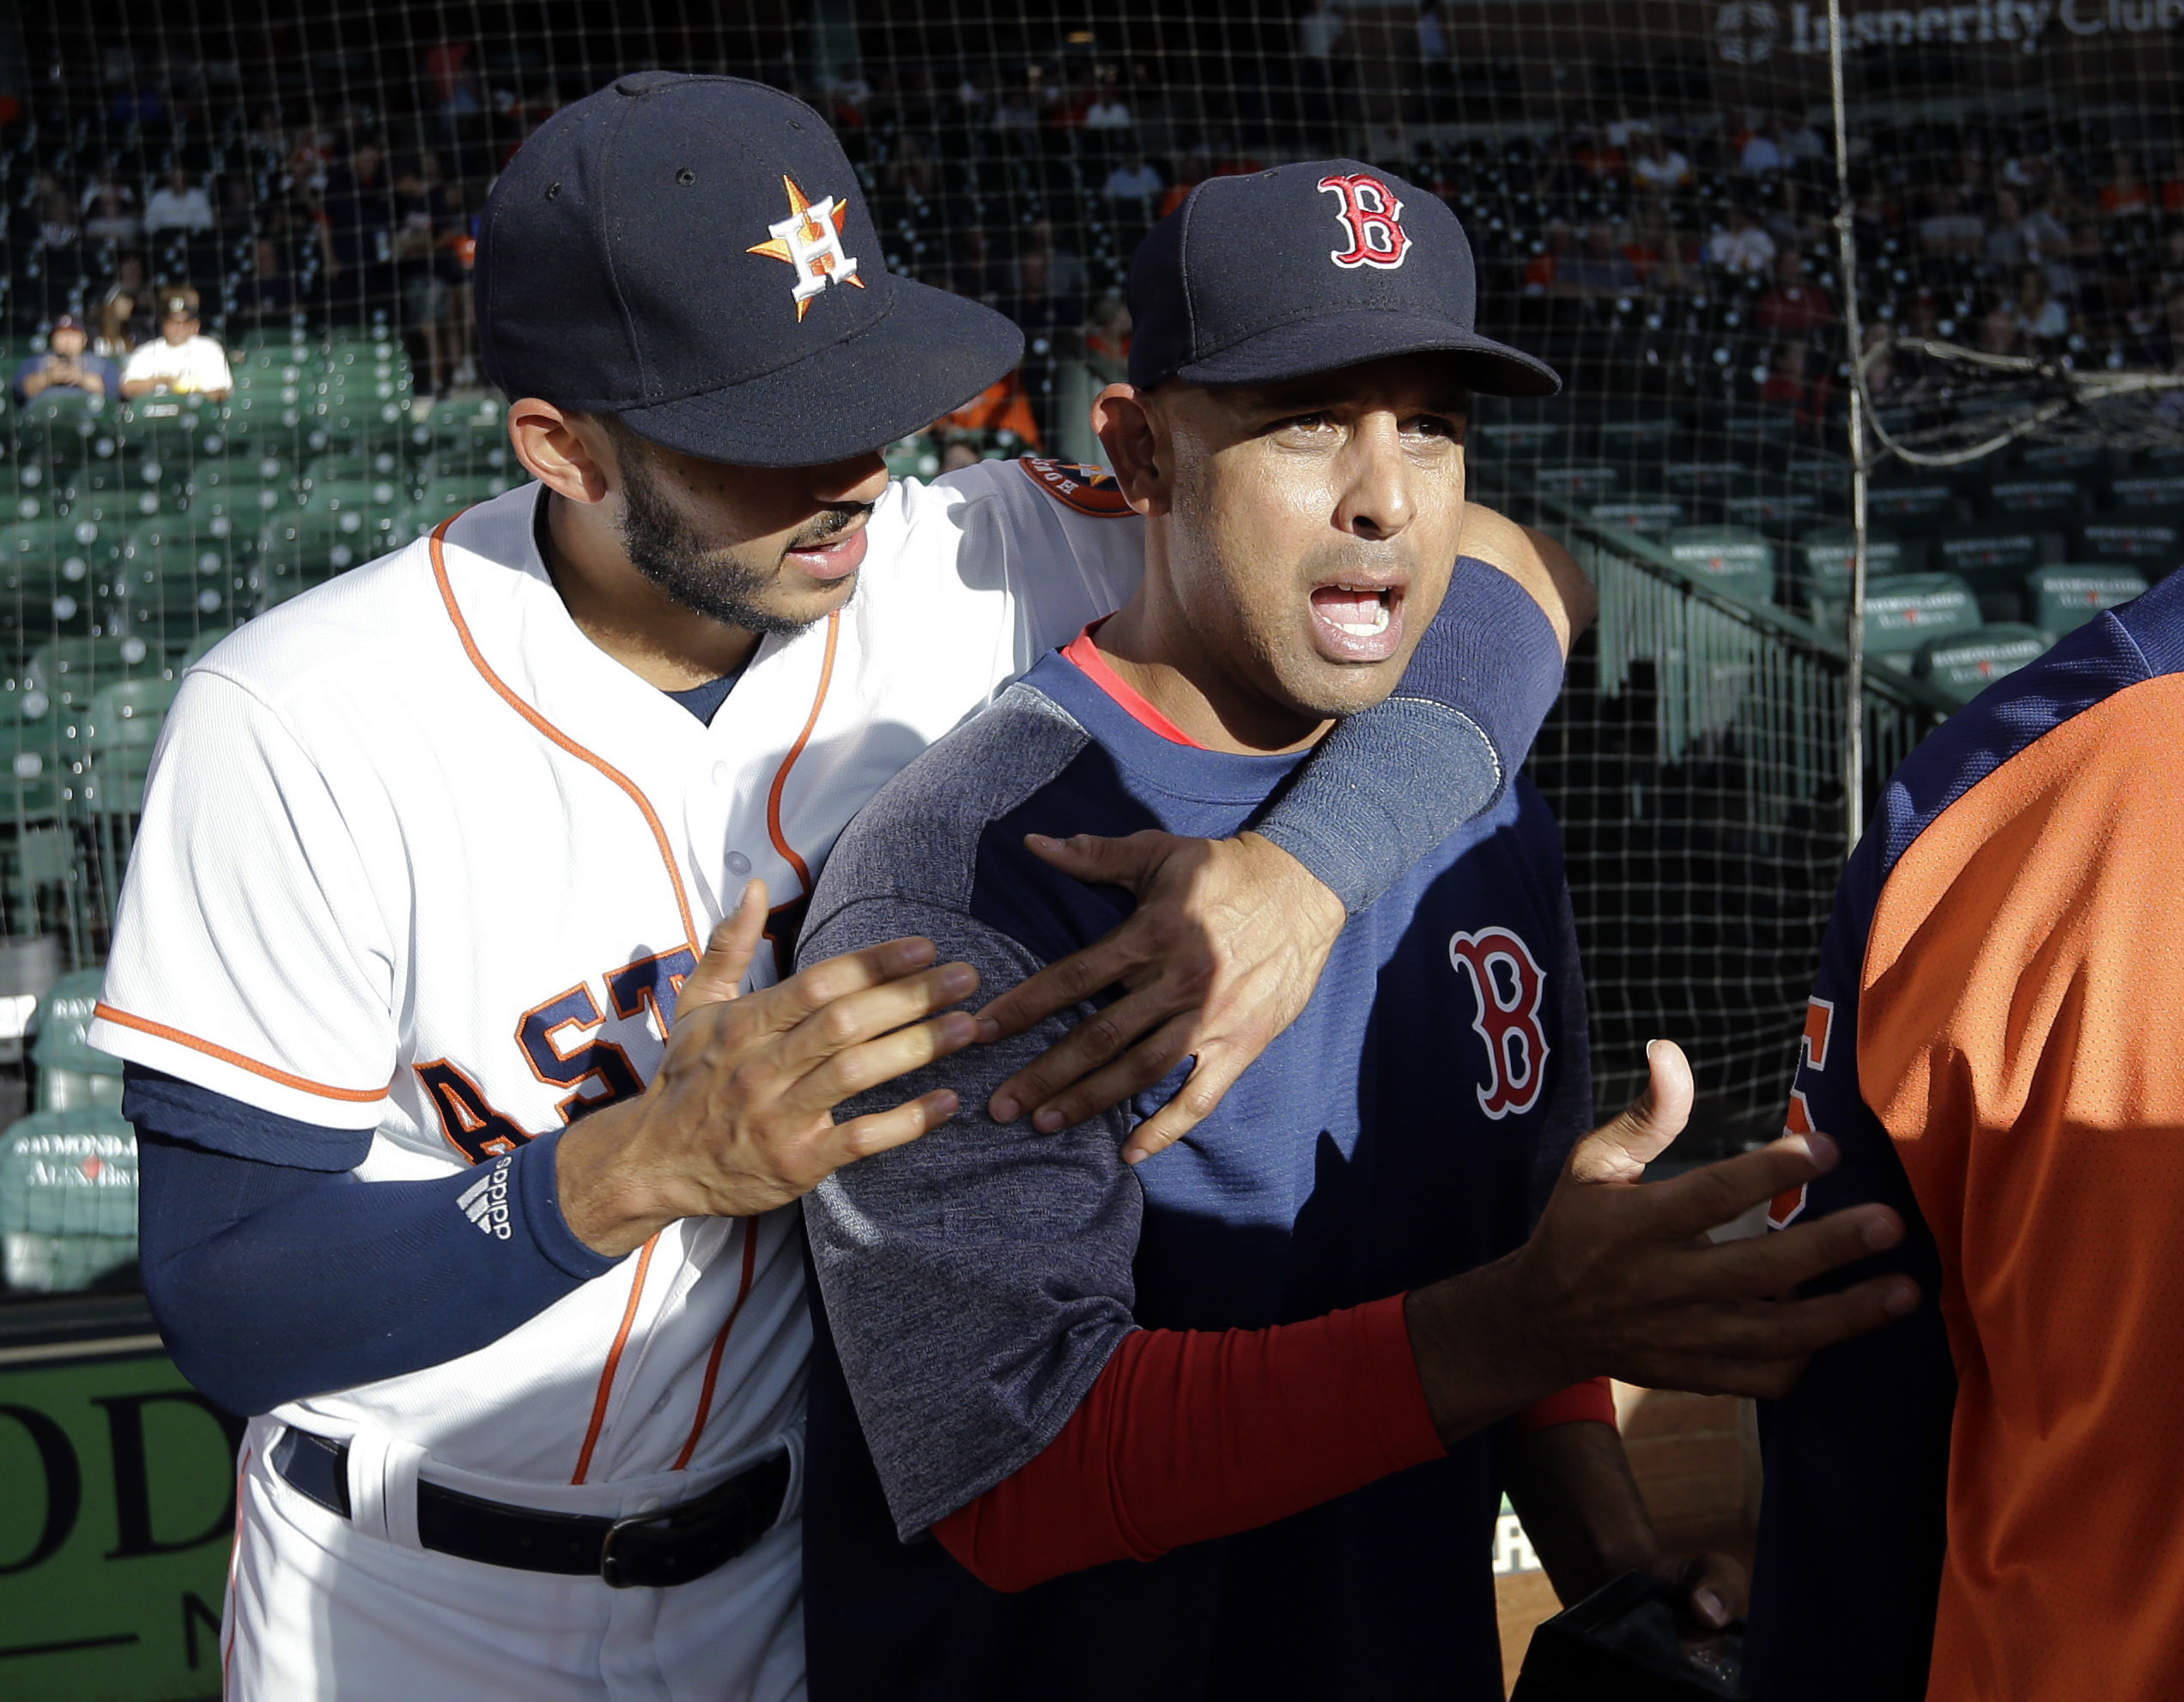 Houston Astros Will Face Boston Red Sox in ALCS - The New York Times